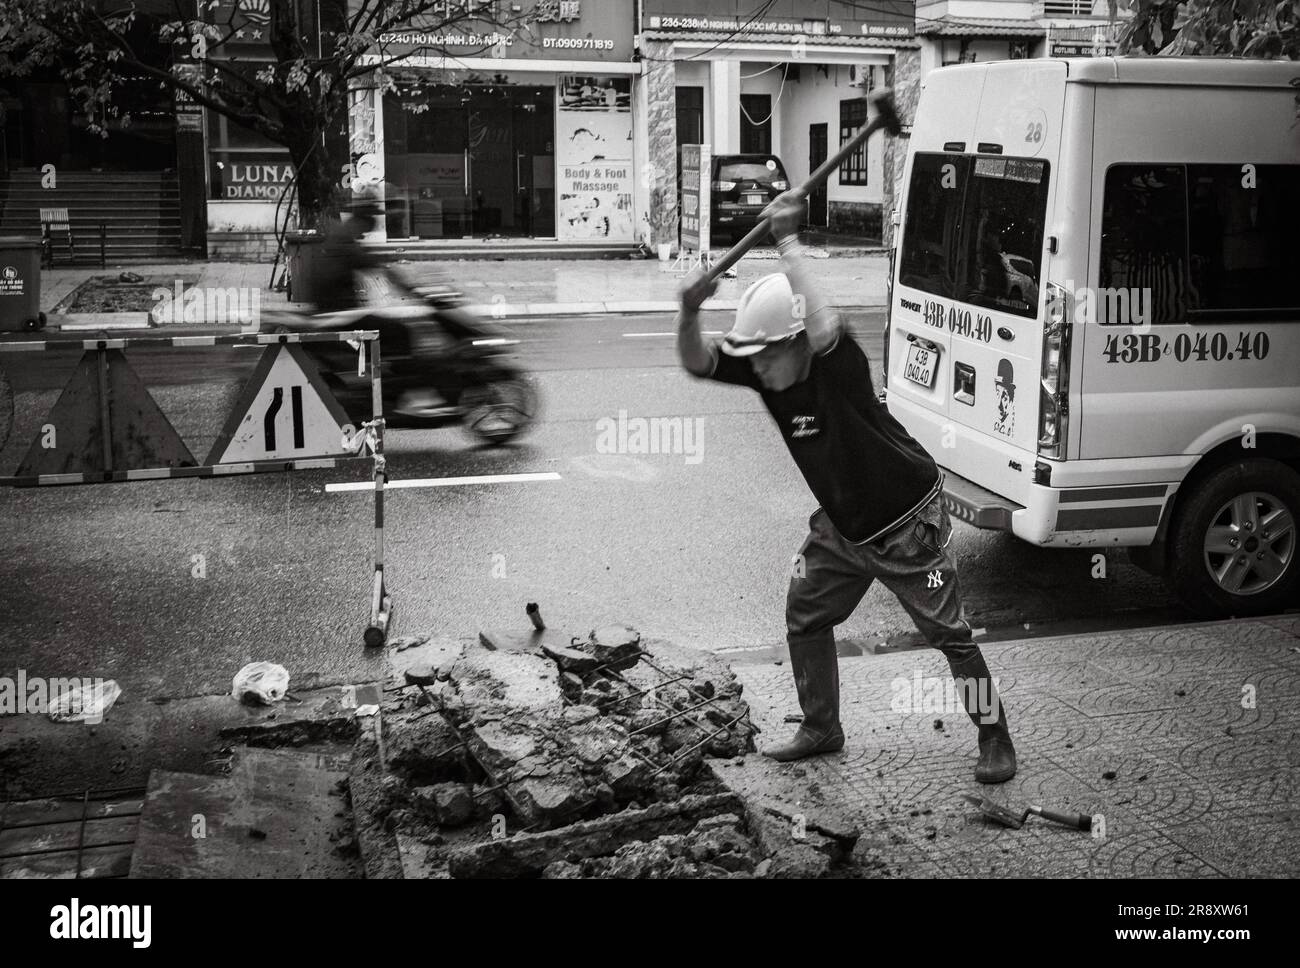 A worker smashes concrete with a sledgehammer on the pavement in Danang, Vietnam. Stock Photo